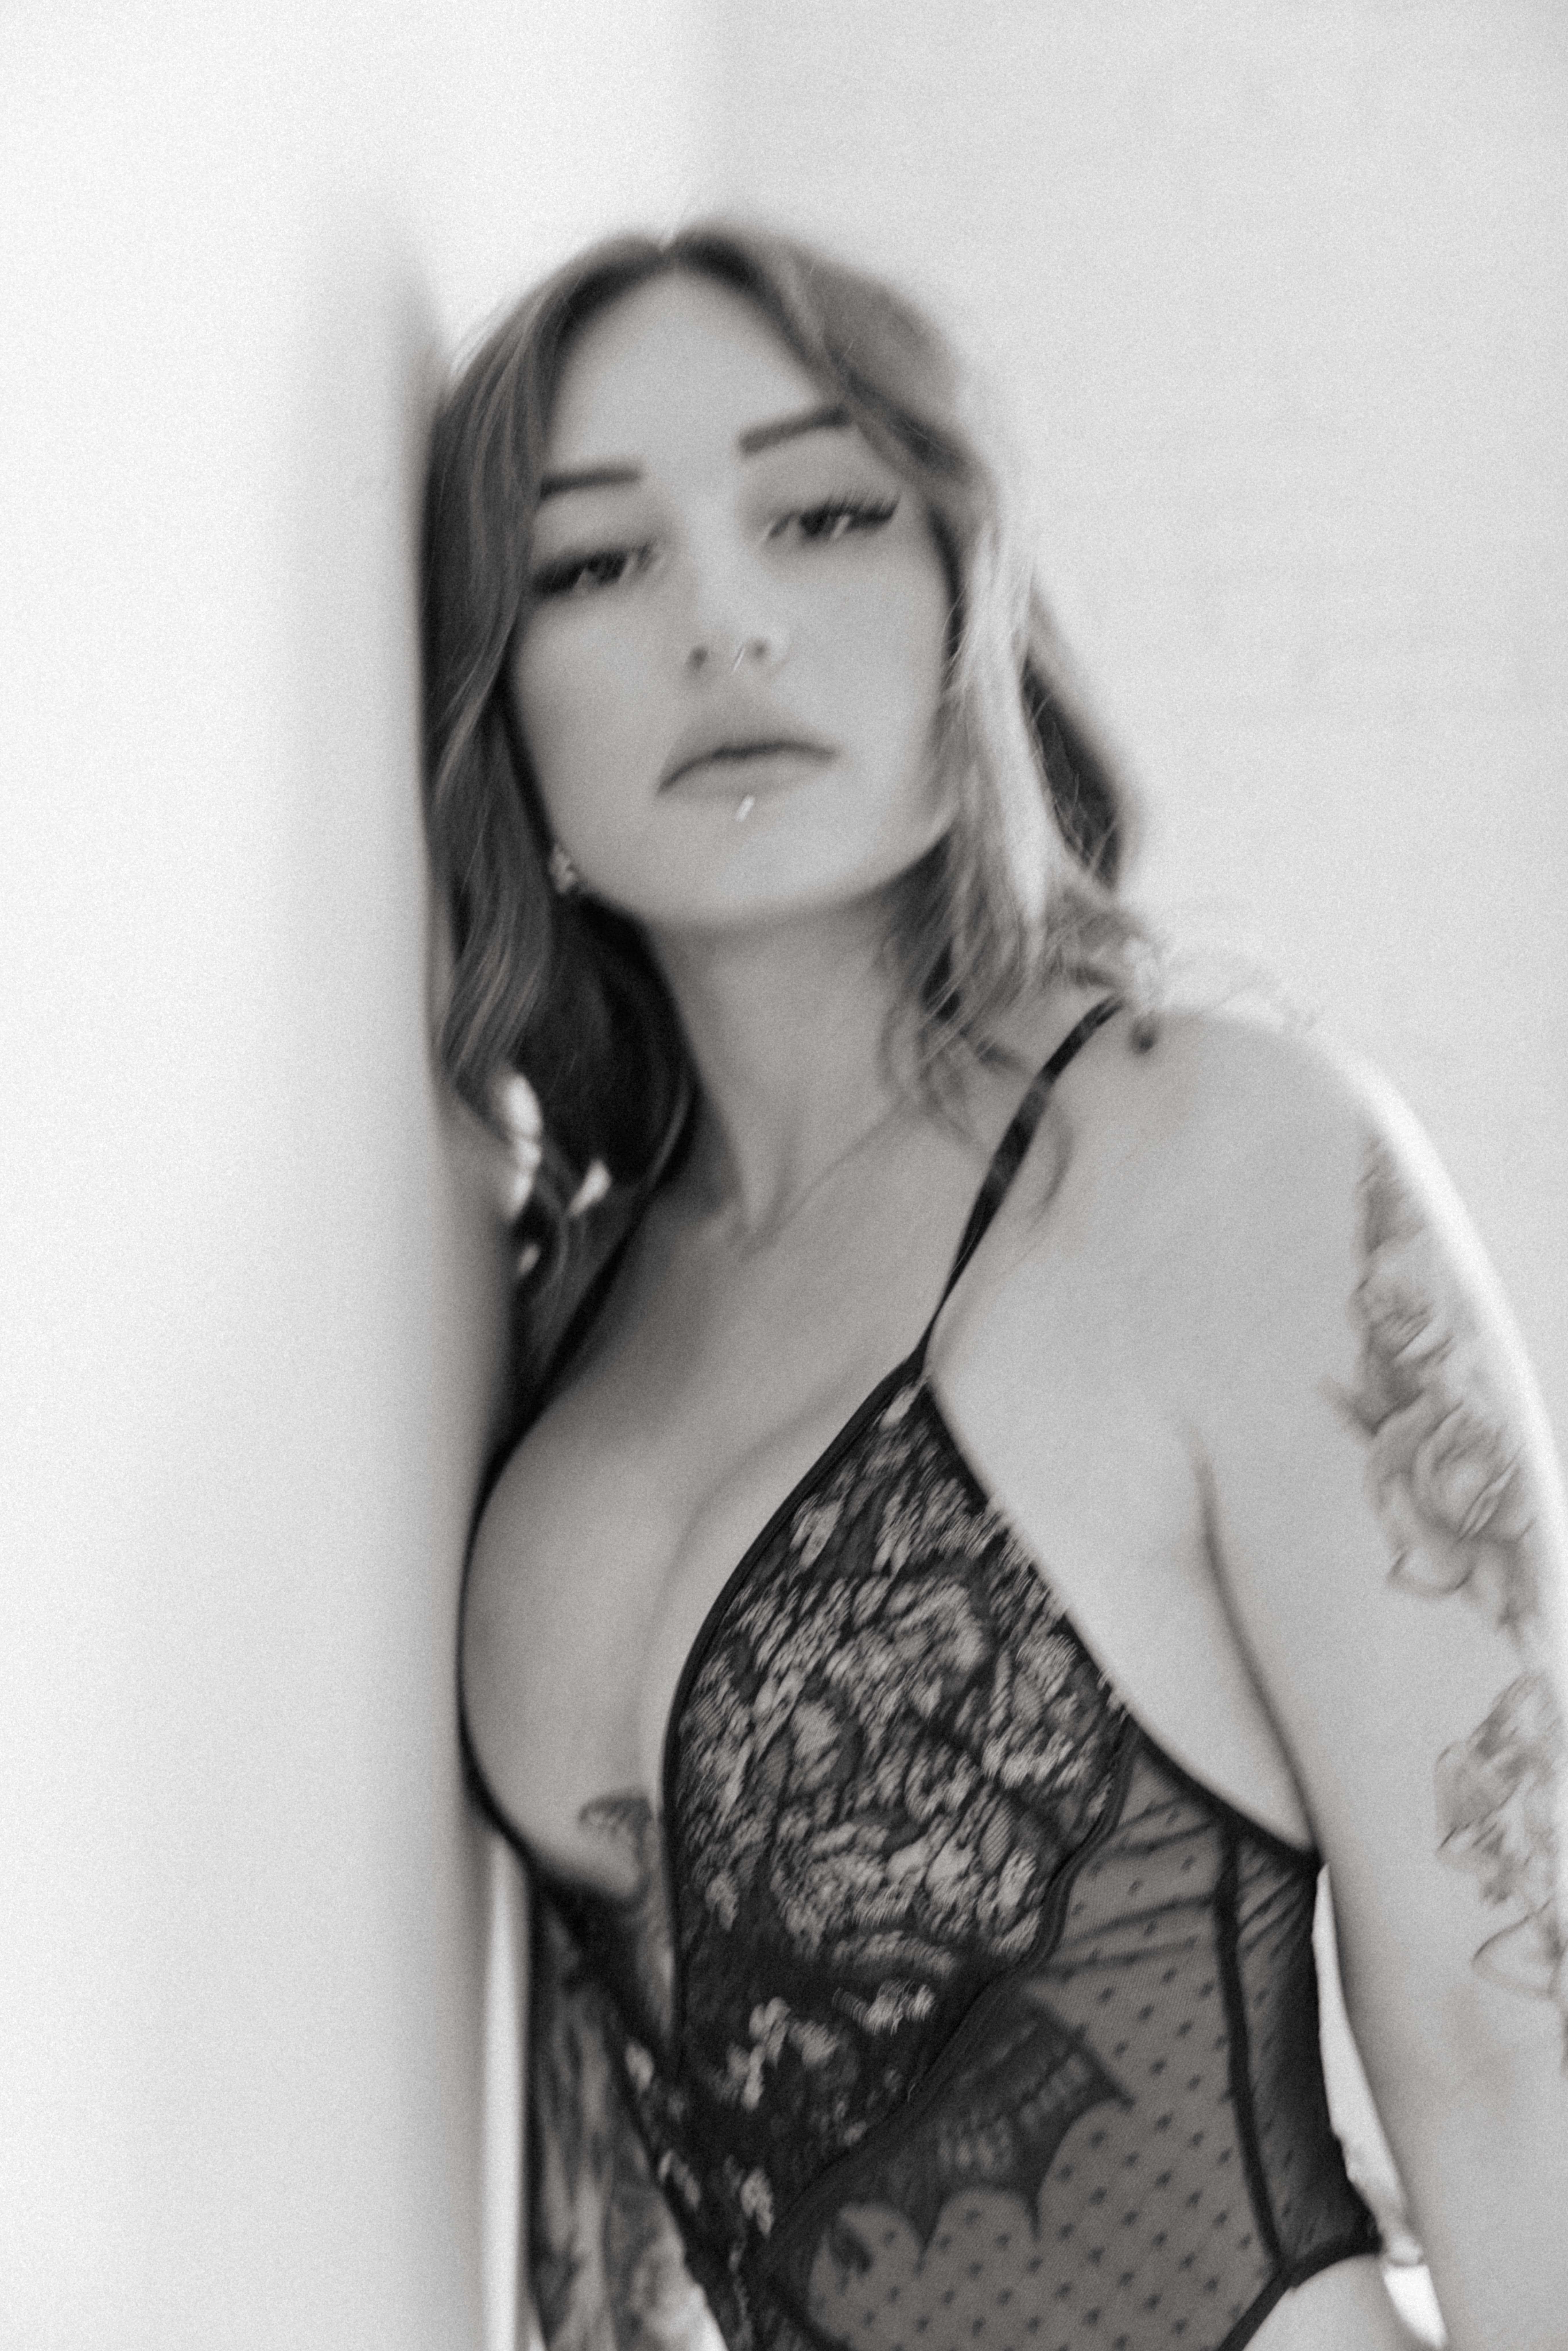 blurry intimate portrait of a woman wearing lingerie 